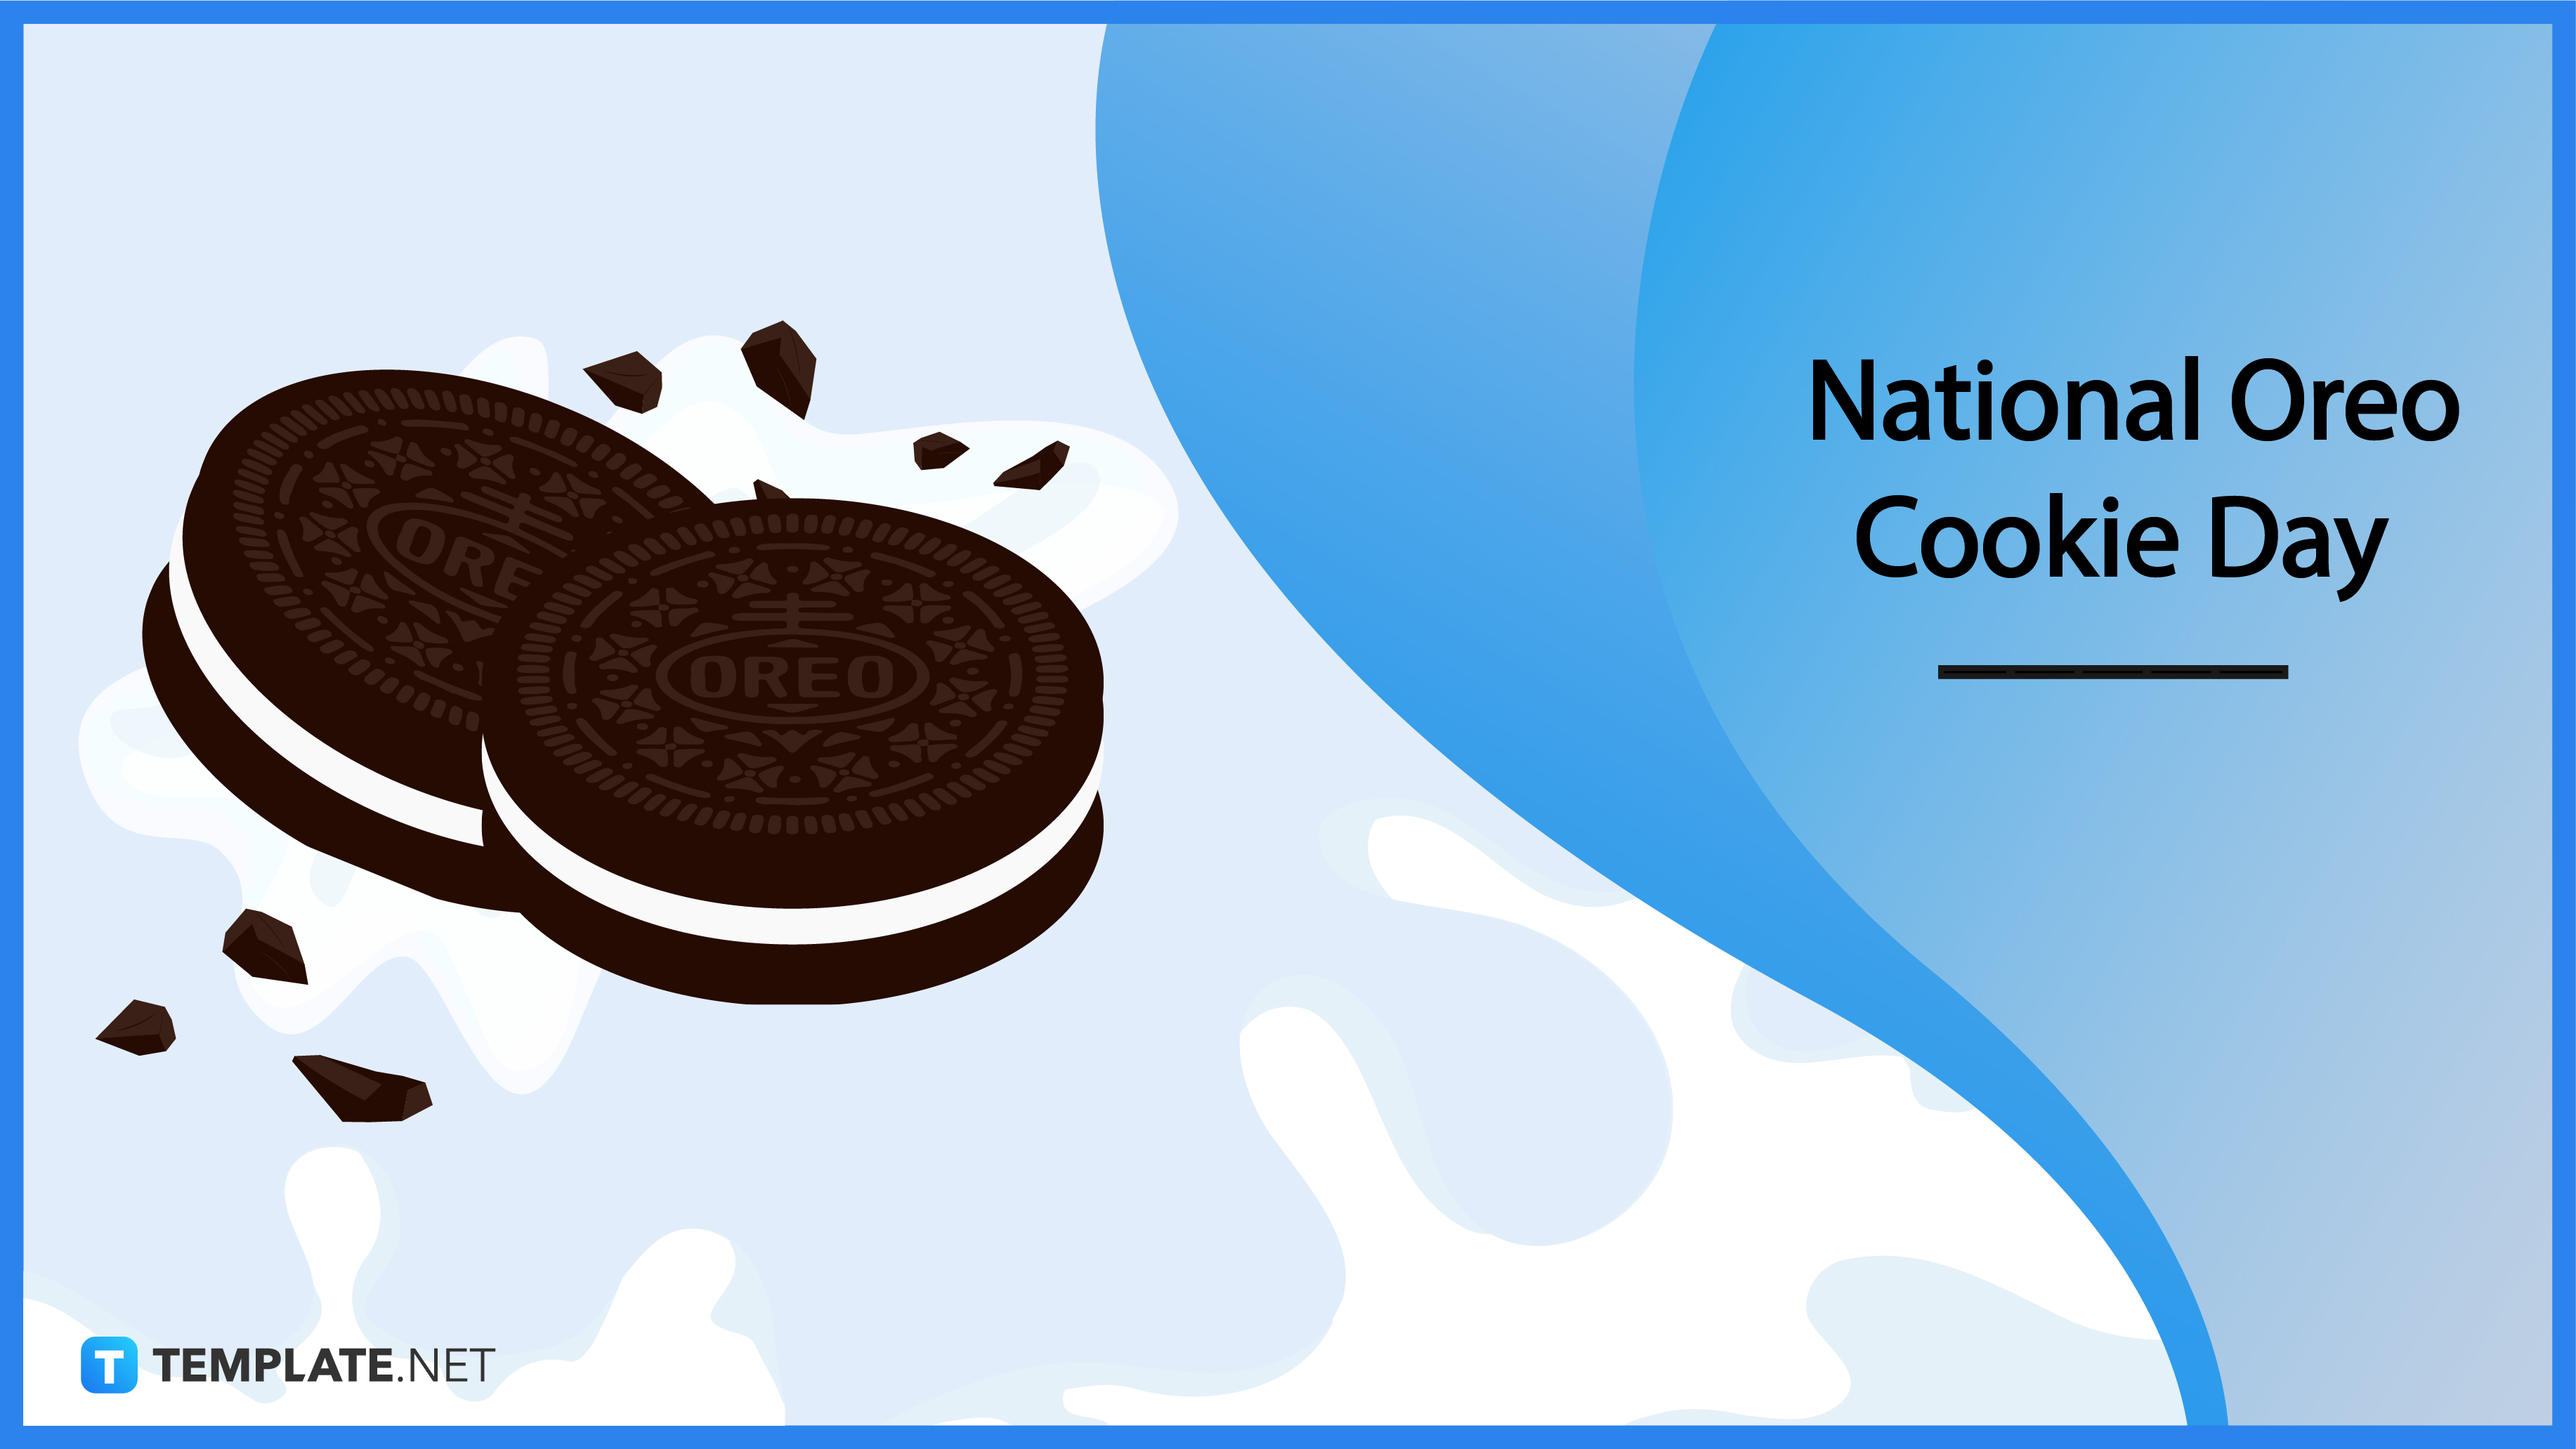 National Oreo Cookie Day When Is The National Oreo Cookie Day? Meaning